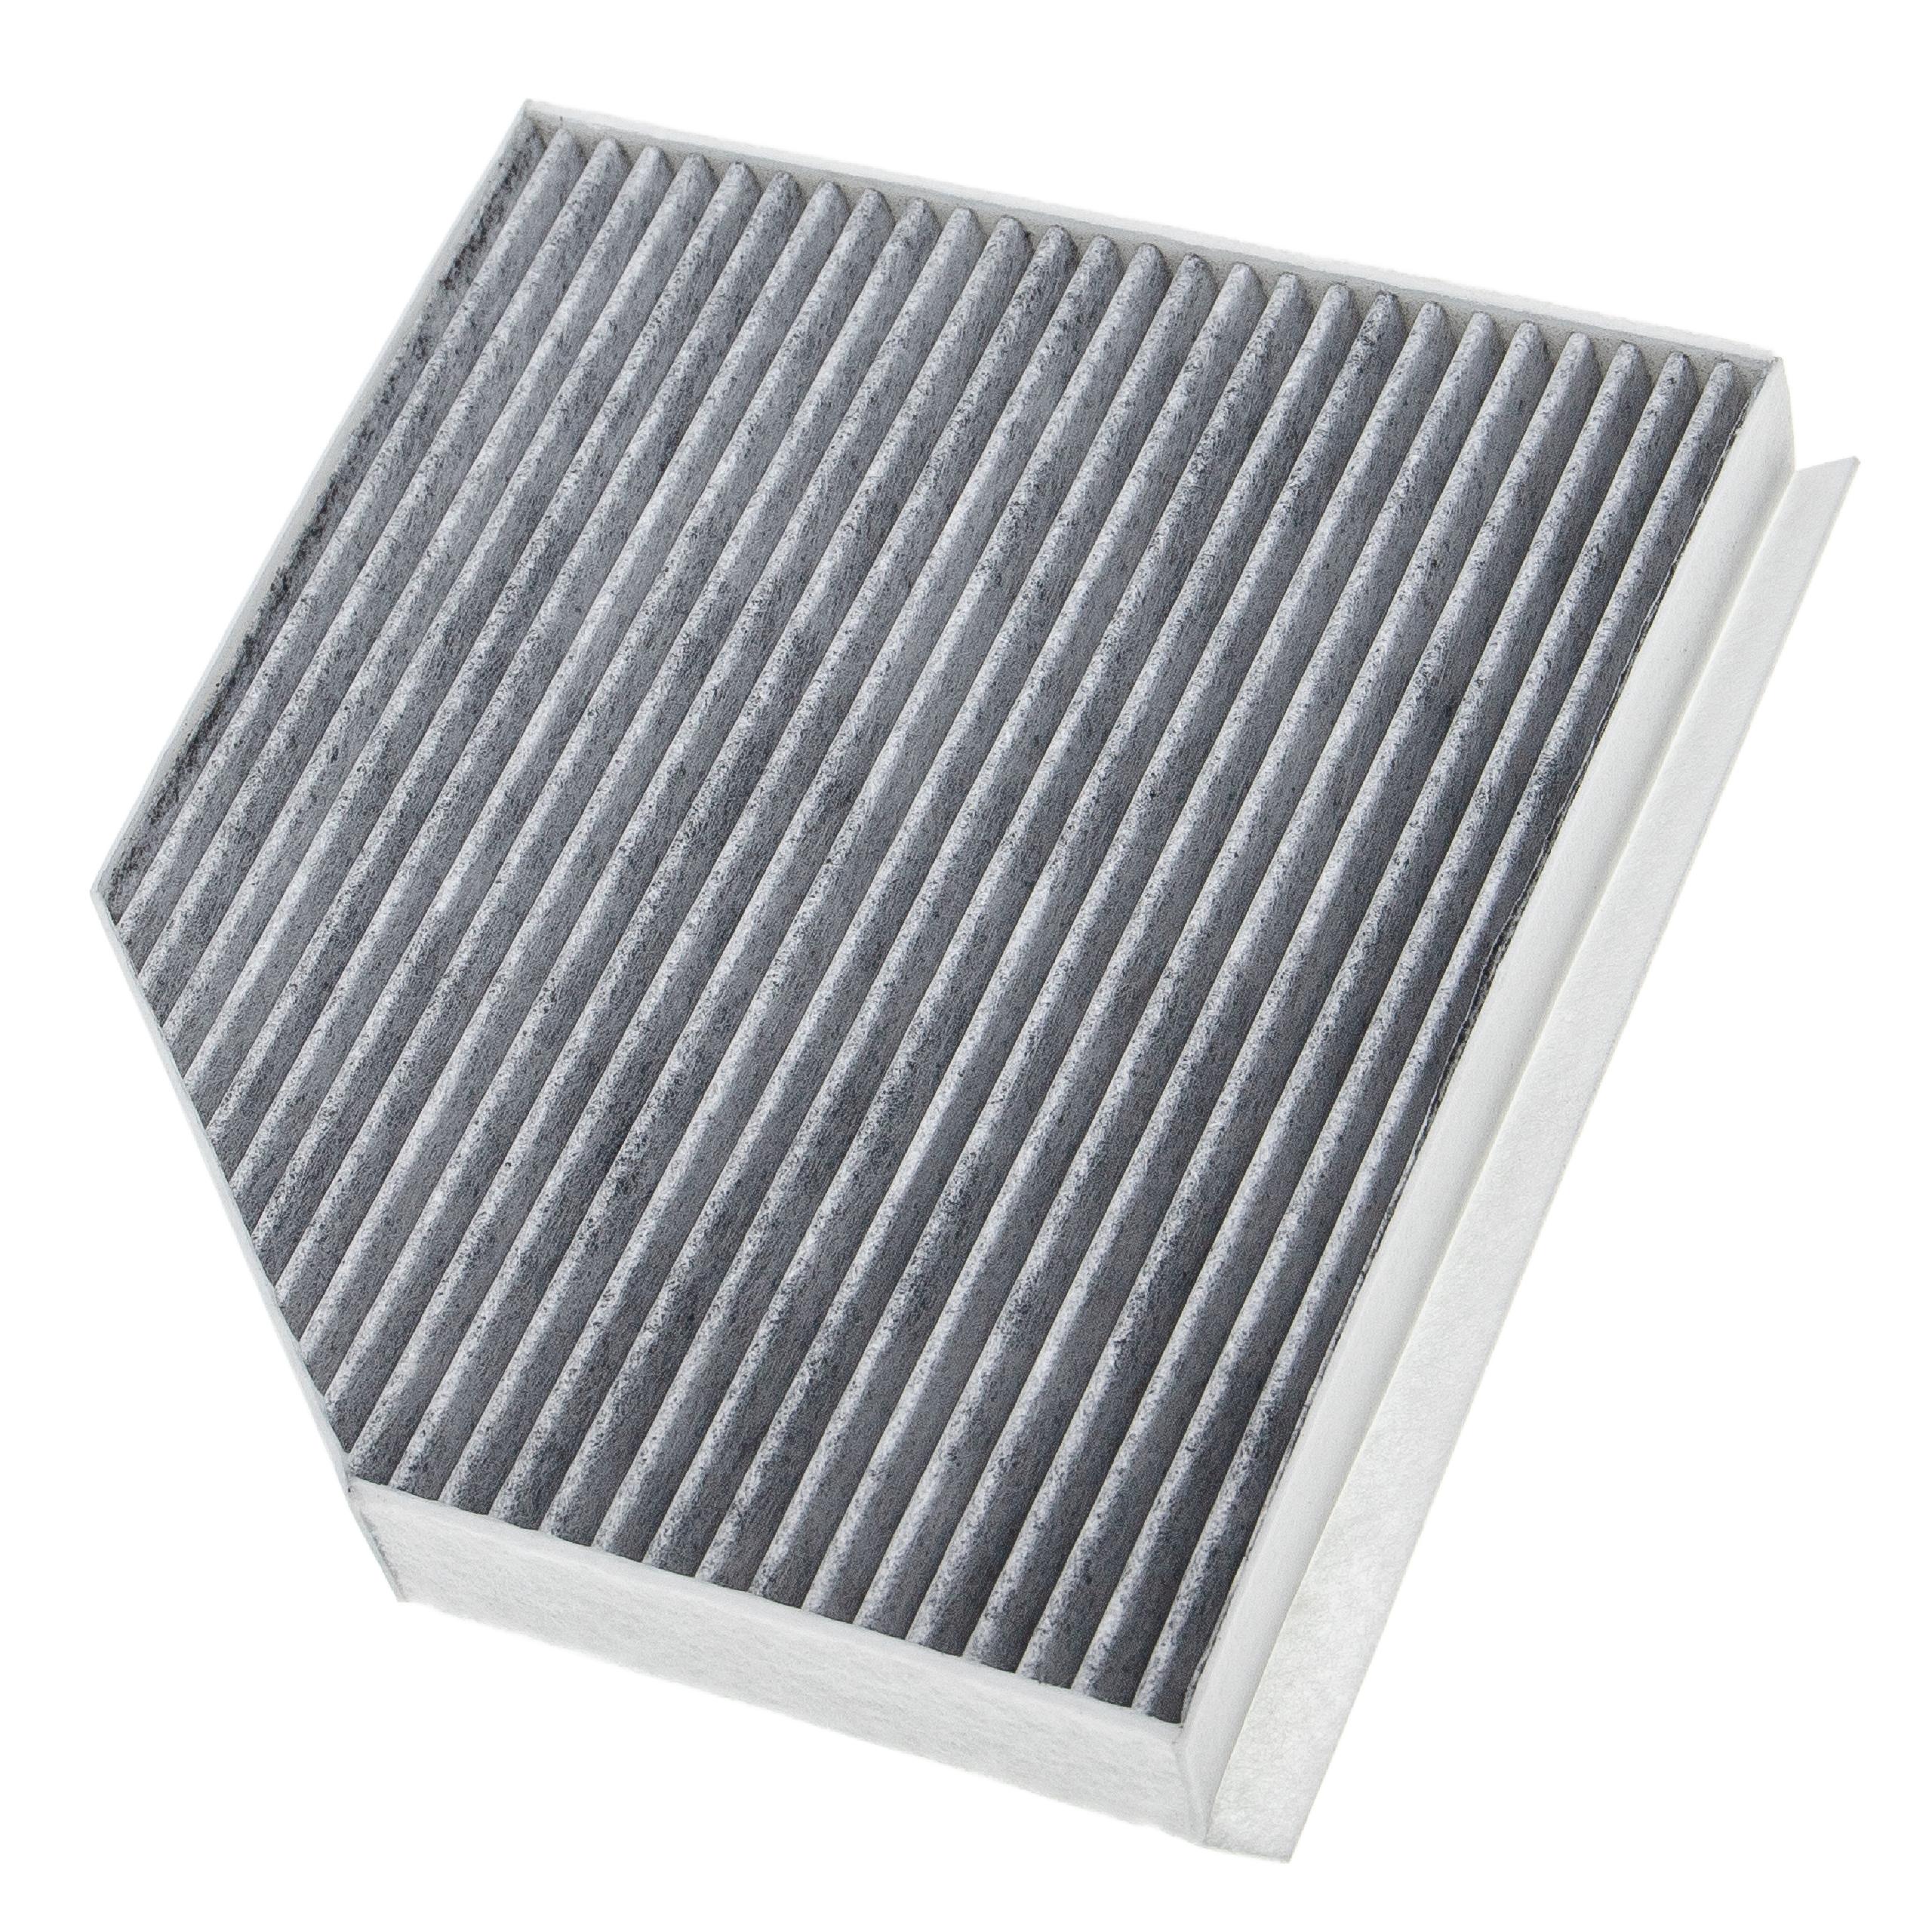 Cabin Air Filter replaces 3F Quality 670